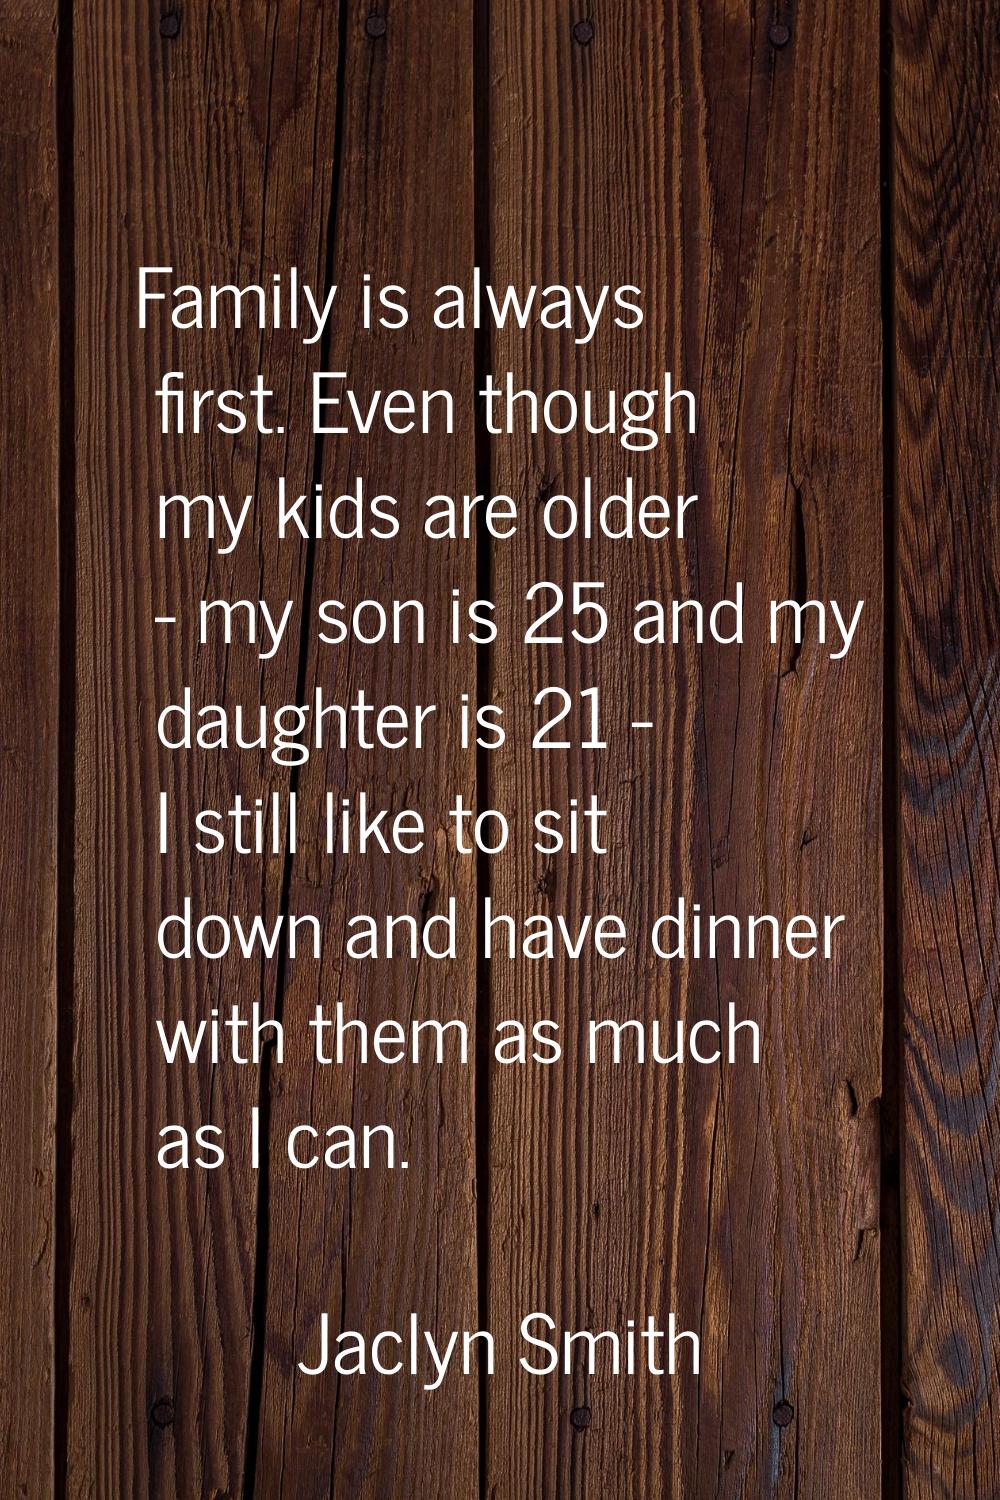 Family is always first. Even though my kids are older - my son is 25 and my daughter is 21 - I stil